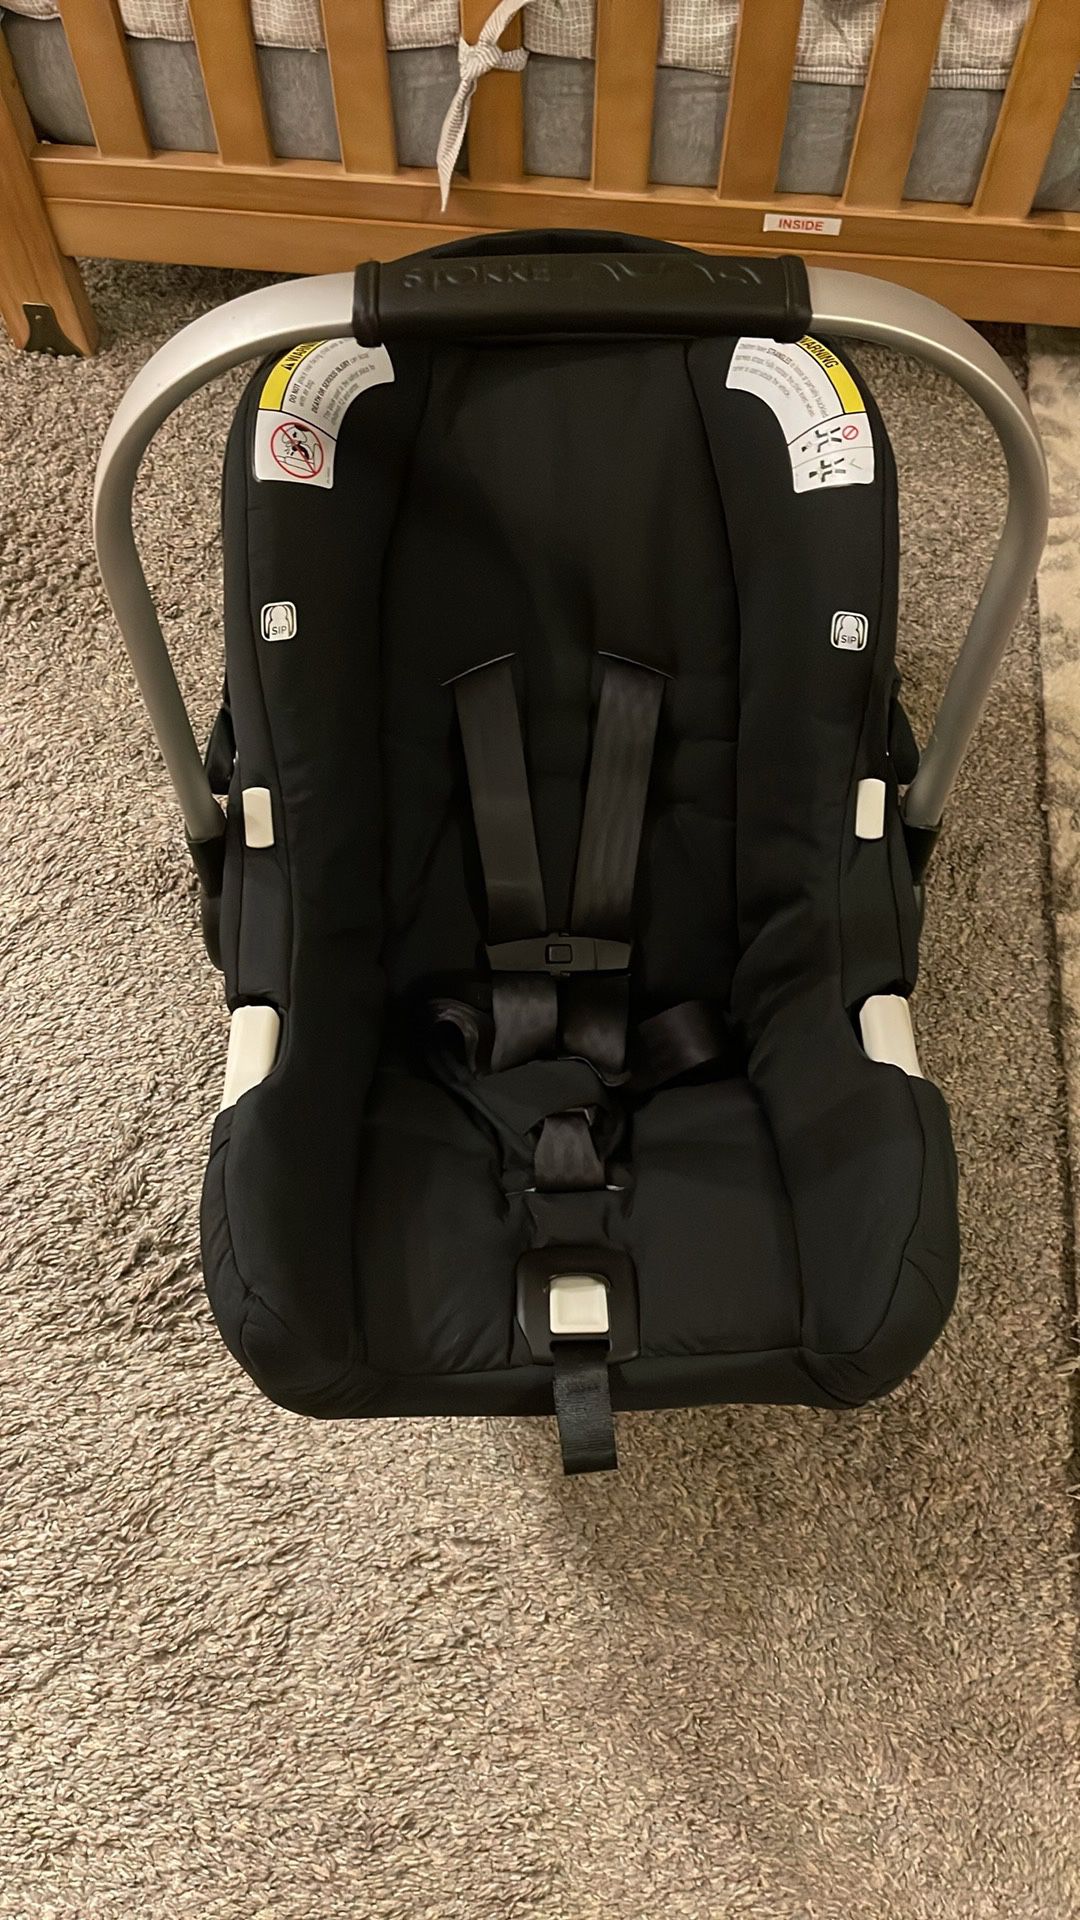 Nuna pipa Carseat With Stokke Adapter and Base